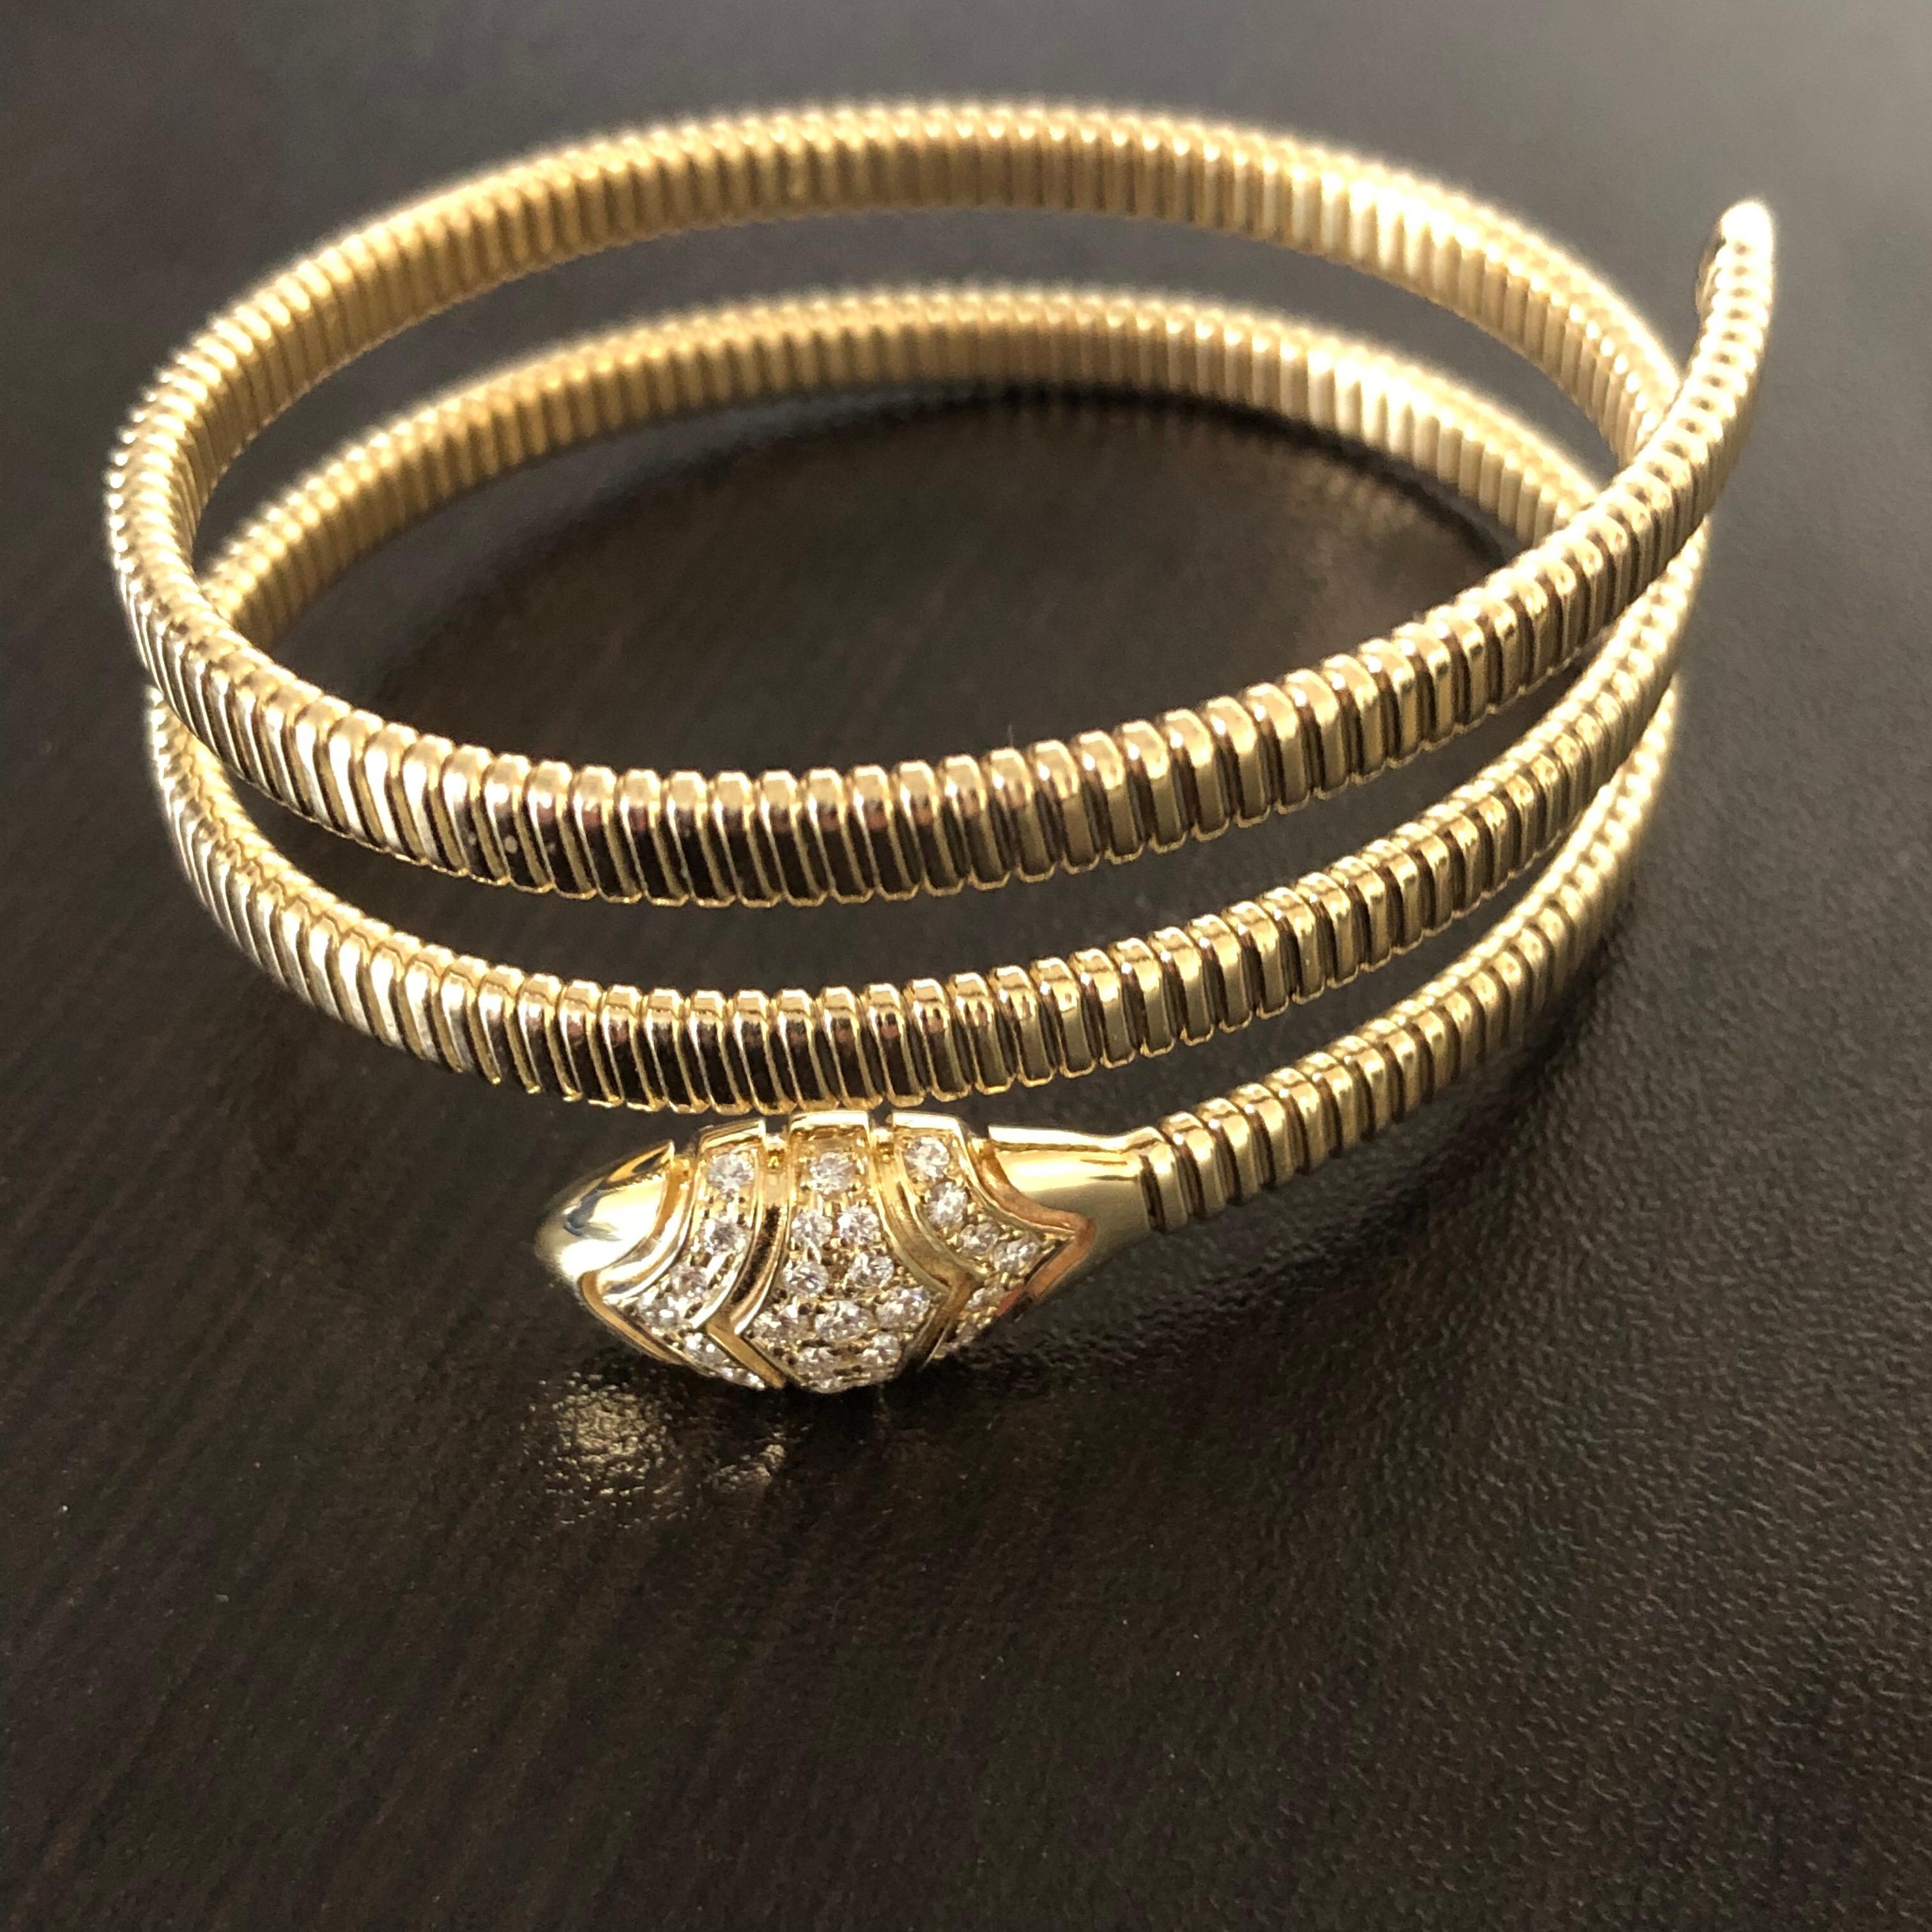 Spiral diamond bangle set in 14K yellow gold. This flexible bangle weighs a total of 0.65 carats. The color of the stones is G, the clarity is SI1. This Italy made piece is available in 14K, 18K rose gold.